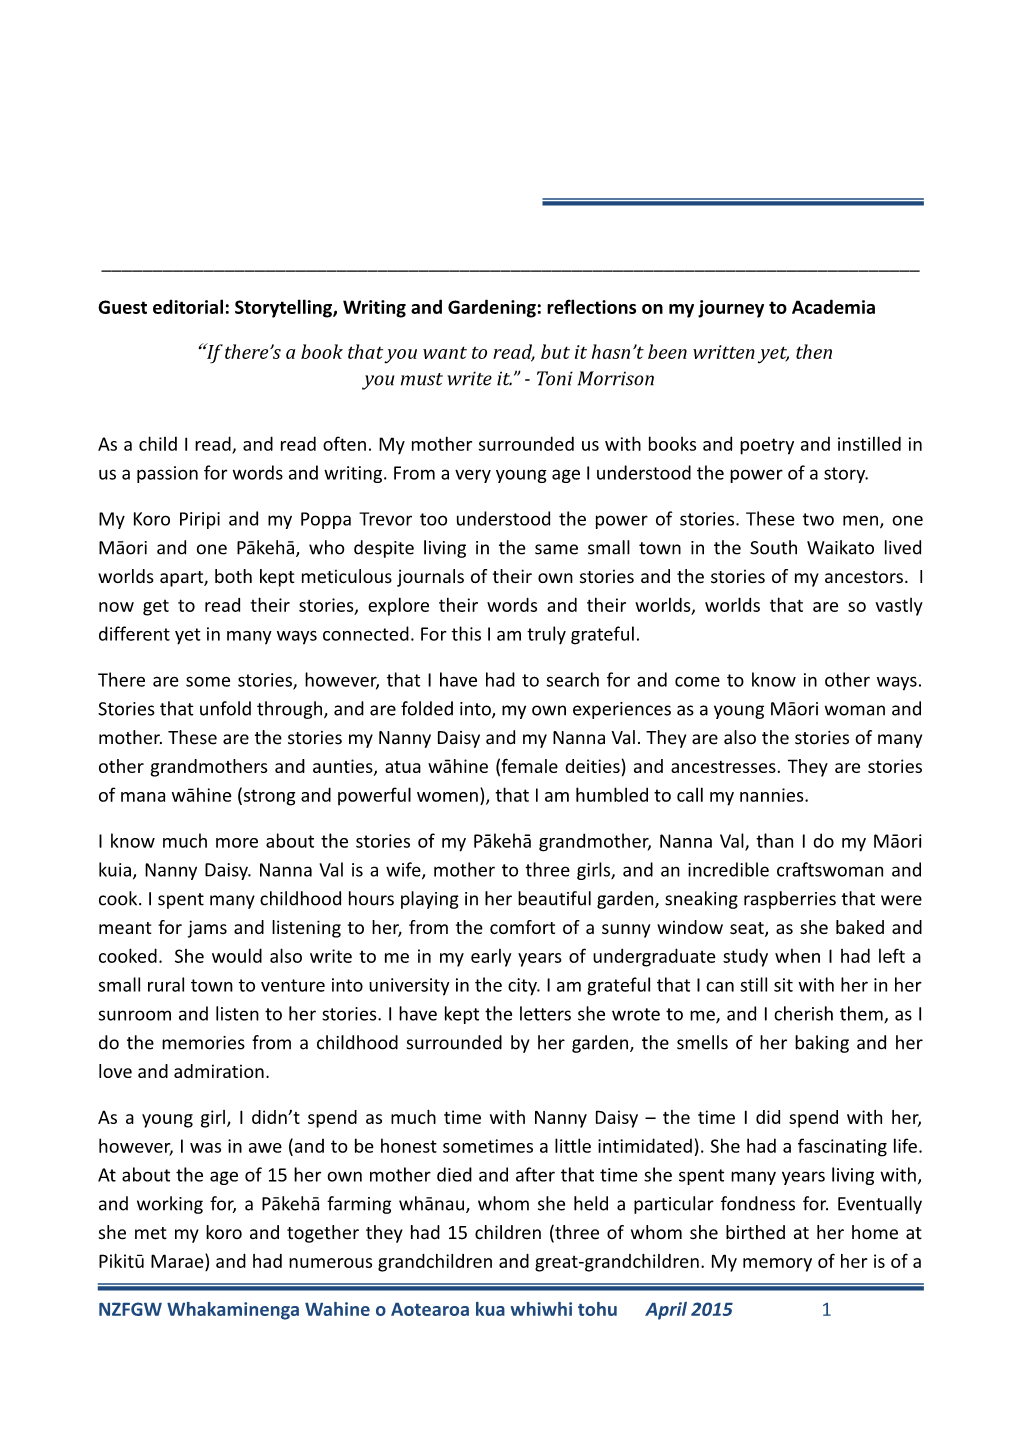 Guest Editorial: Storytelling, Writing and Gardening: Reflections on My Journey to Academia